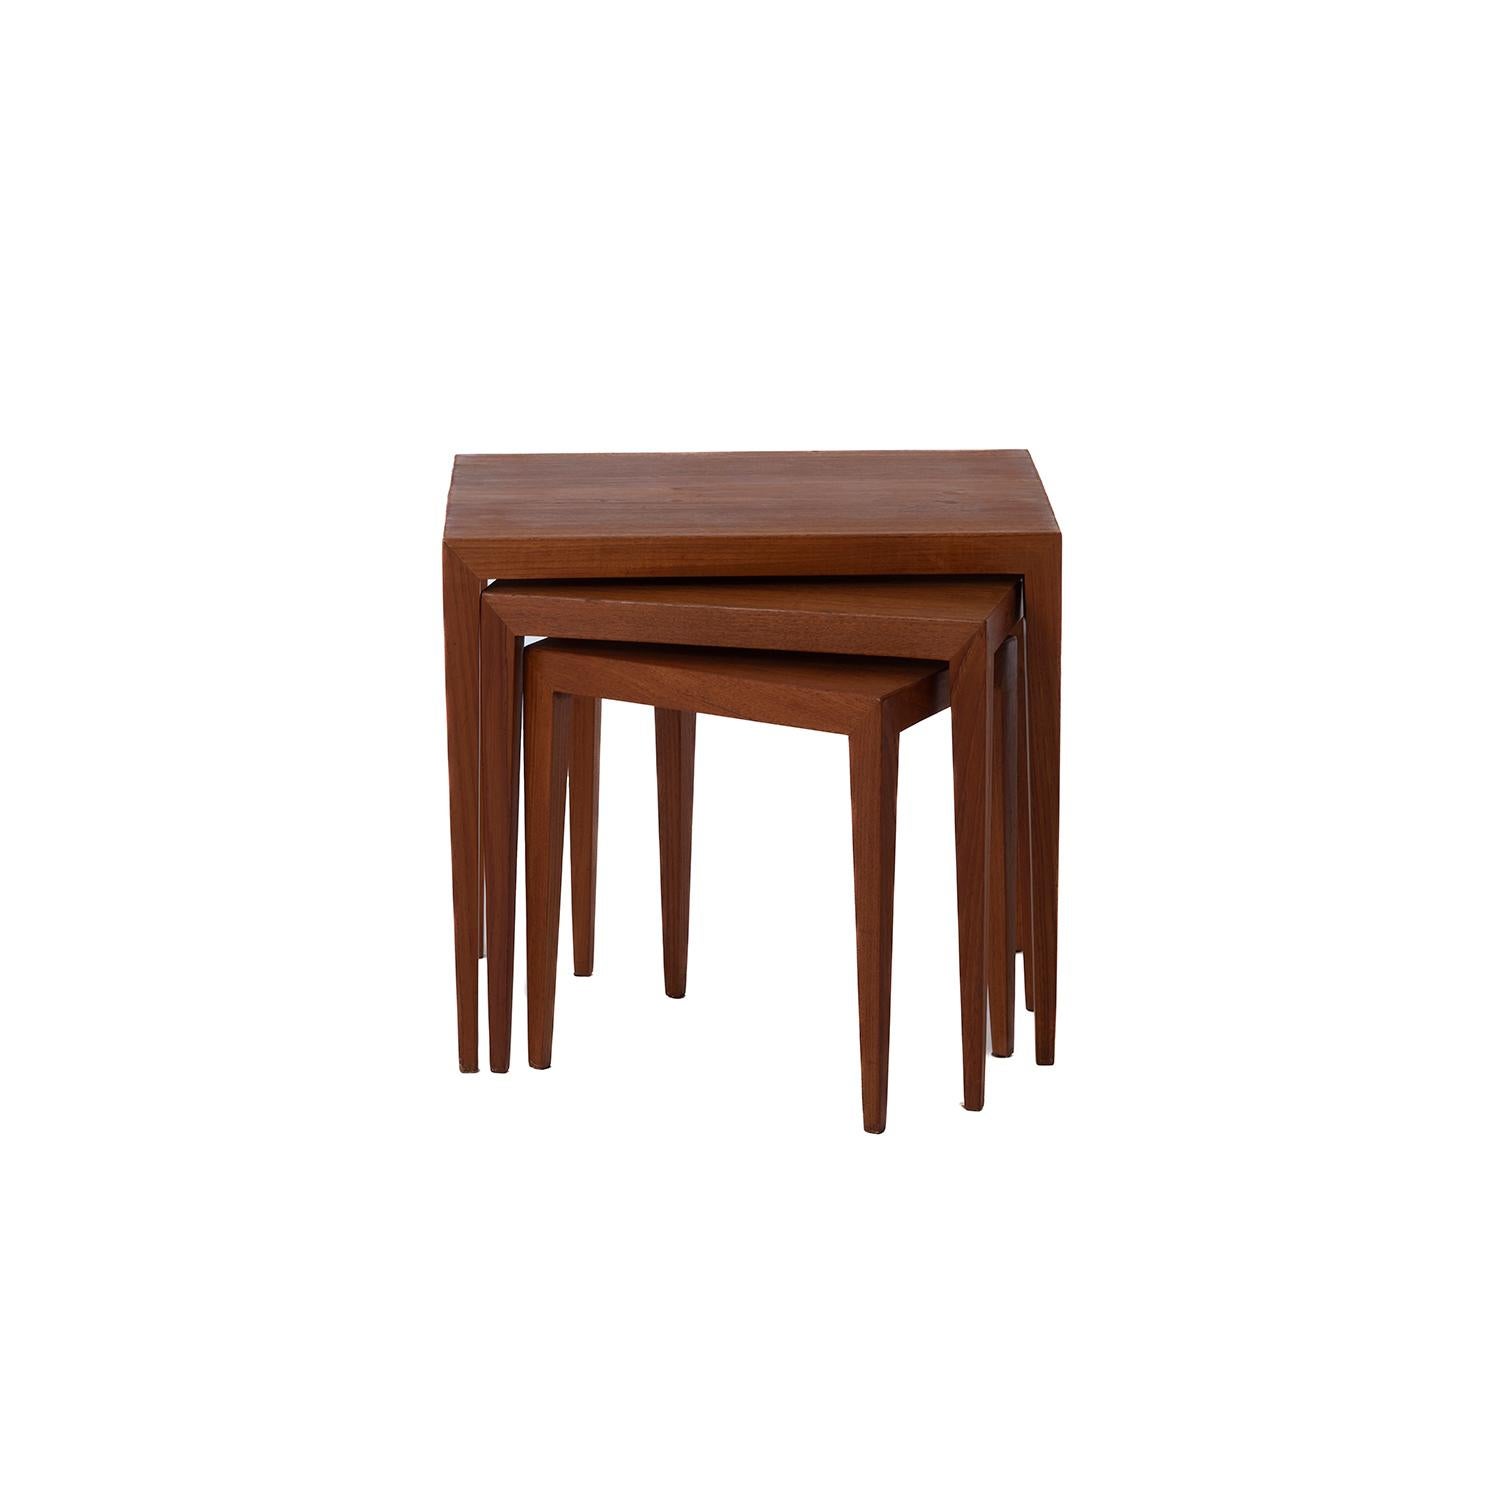 Danish modern oiled teak nesting tables designed by Severin Hansen. Minimal design with his signature double mitered legs. Restoration of set will be completed upon purchase.

Professional, skilled furniture restoration is an integral part of what